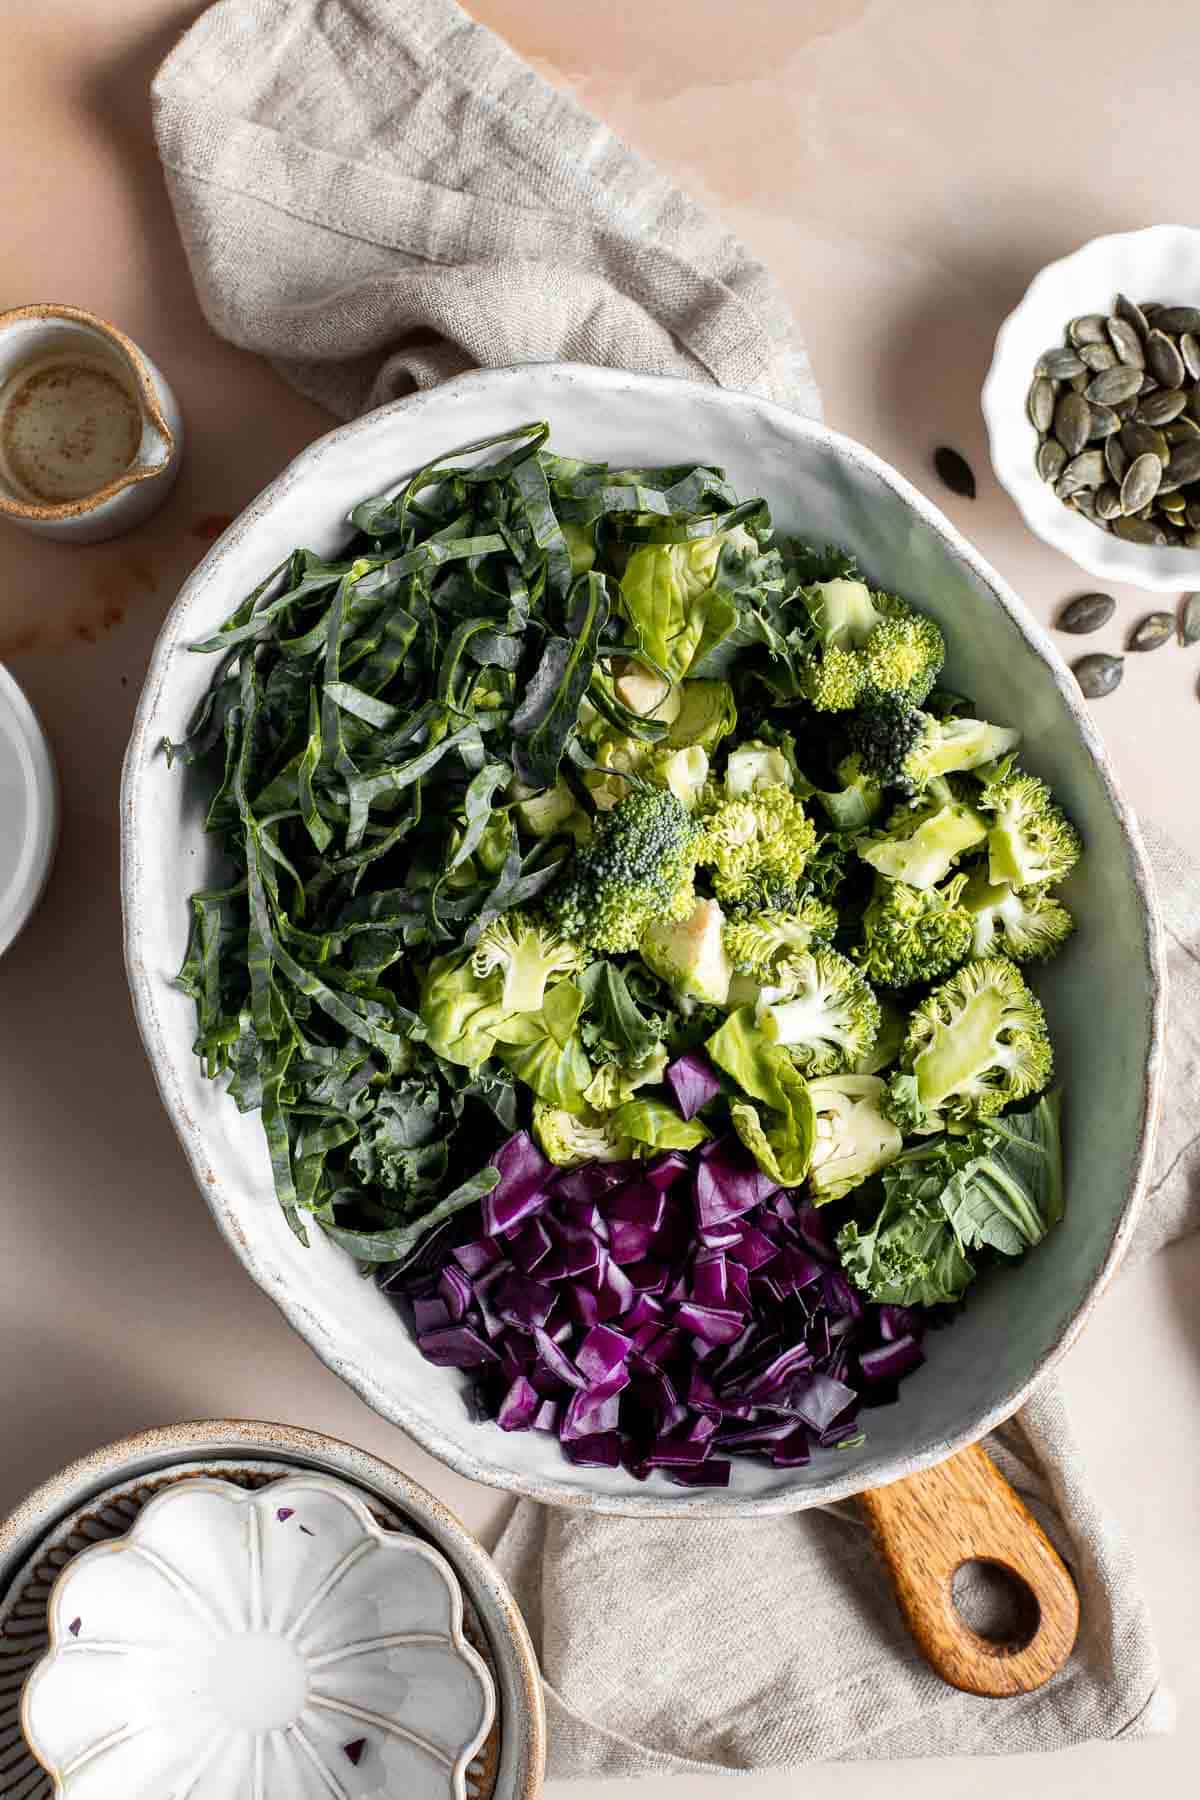 This Sweet Kale Salad is loaded with hearty greens, veggies, and homemade poppy seed dressing — inspired by the Taylor Farms salad kit from Costco. | aheadofthyme.com